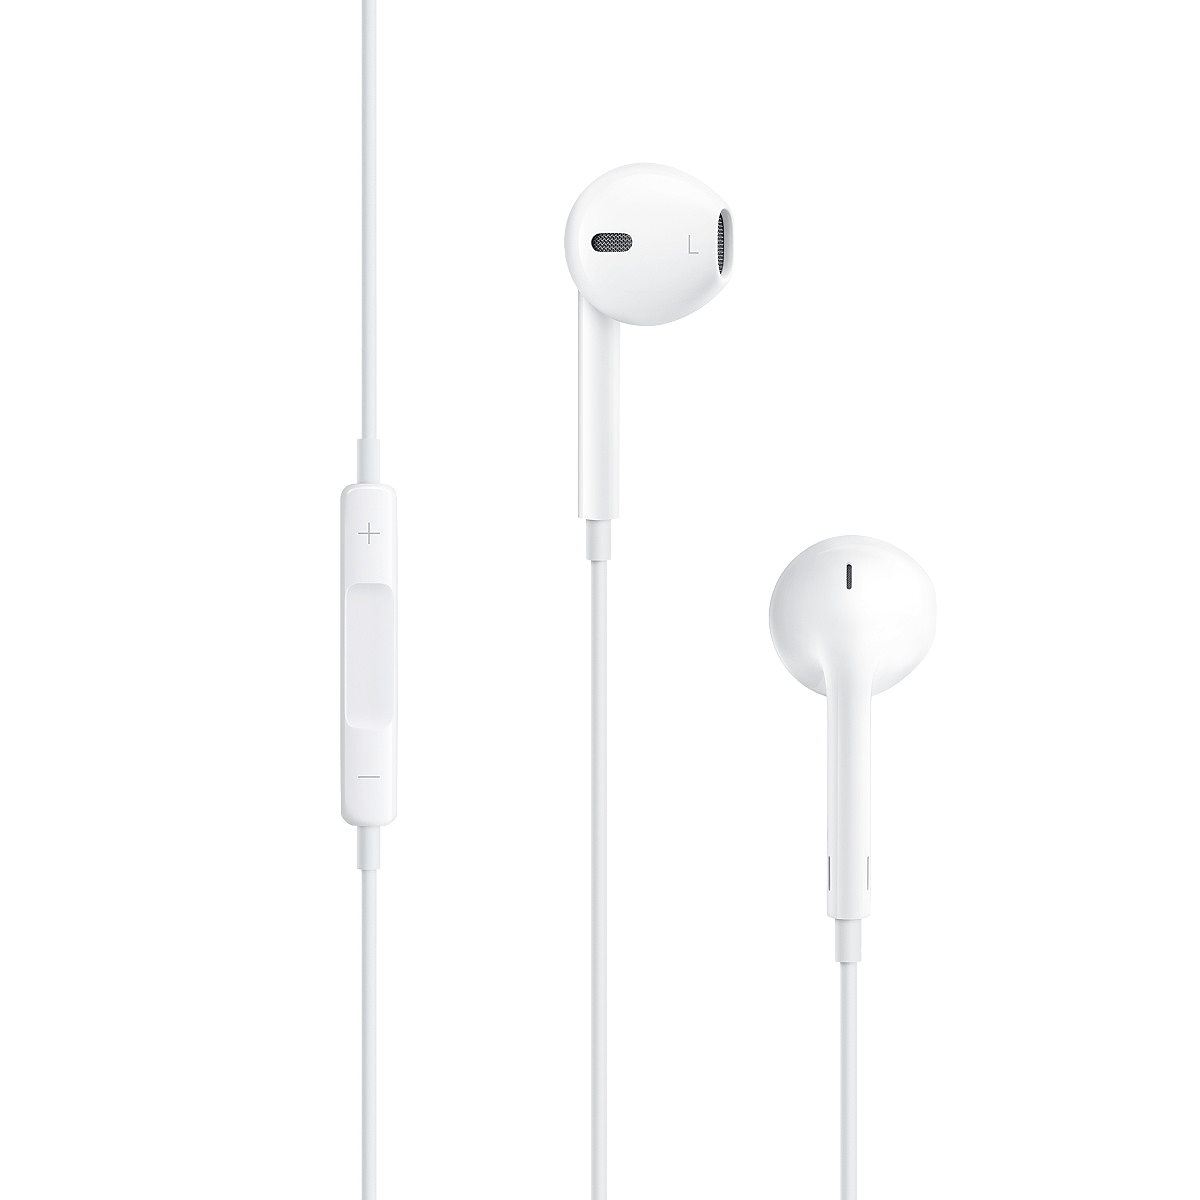 Pencil Microphone Airpods Apple Headphones Technology PNG Image